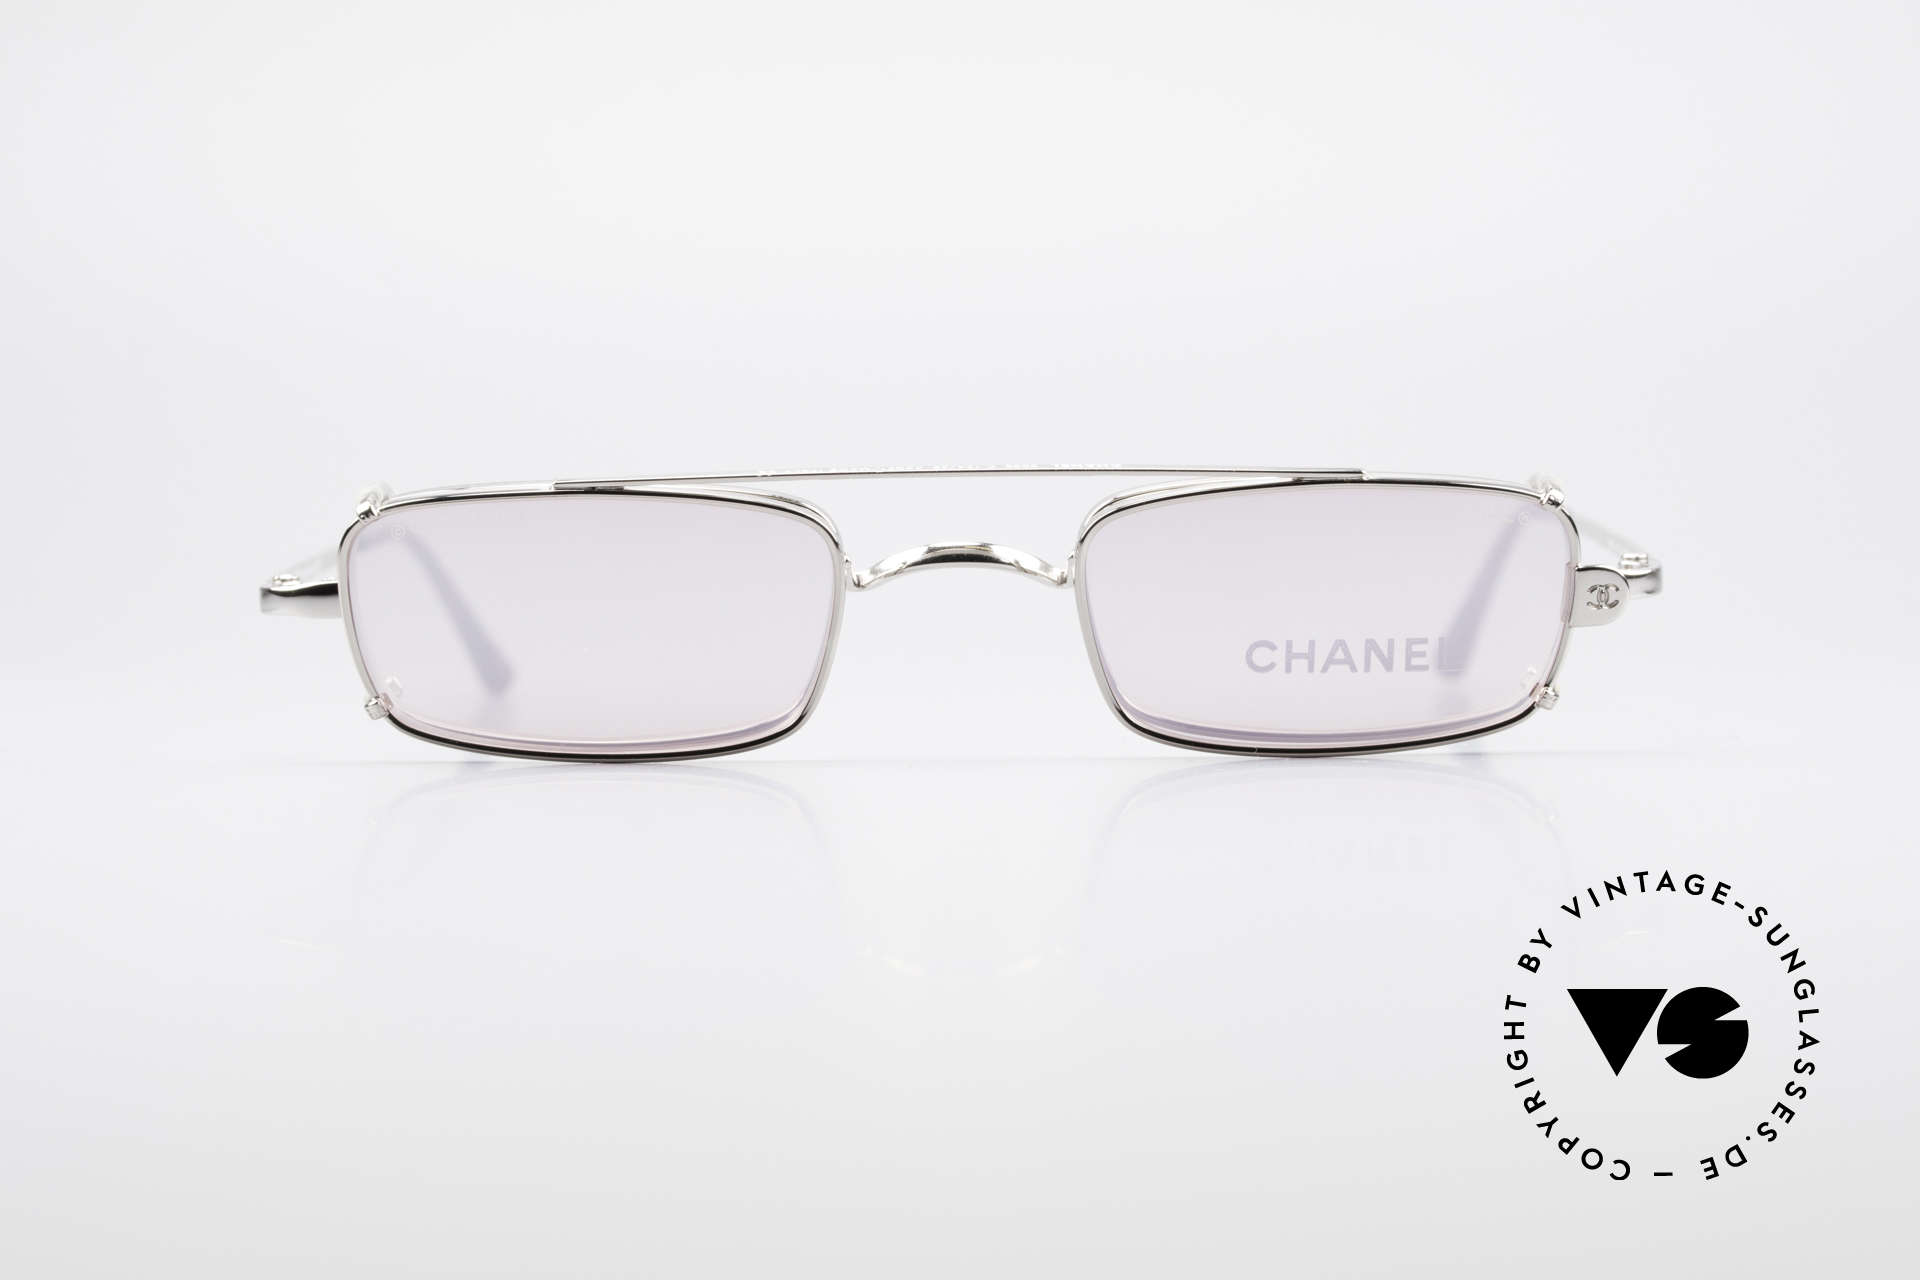 Sunglasses Chanel 2038 Pink Luxury Glasses Clip On